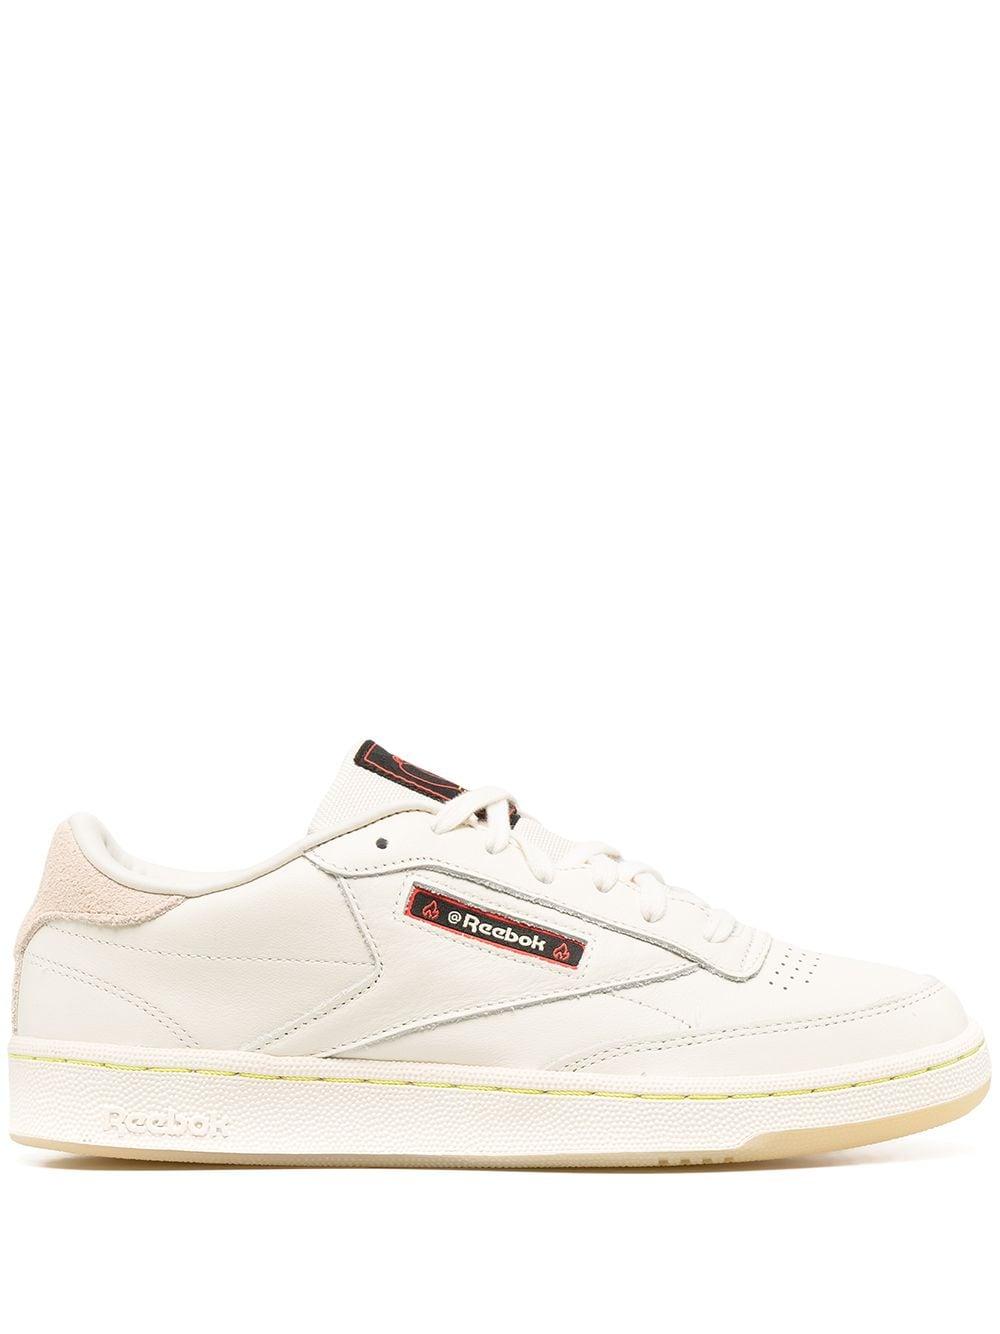 Reebok Leather Hot Ones Club C 85 Sneakers in White for Men - Lyst